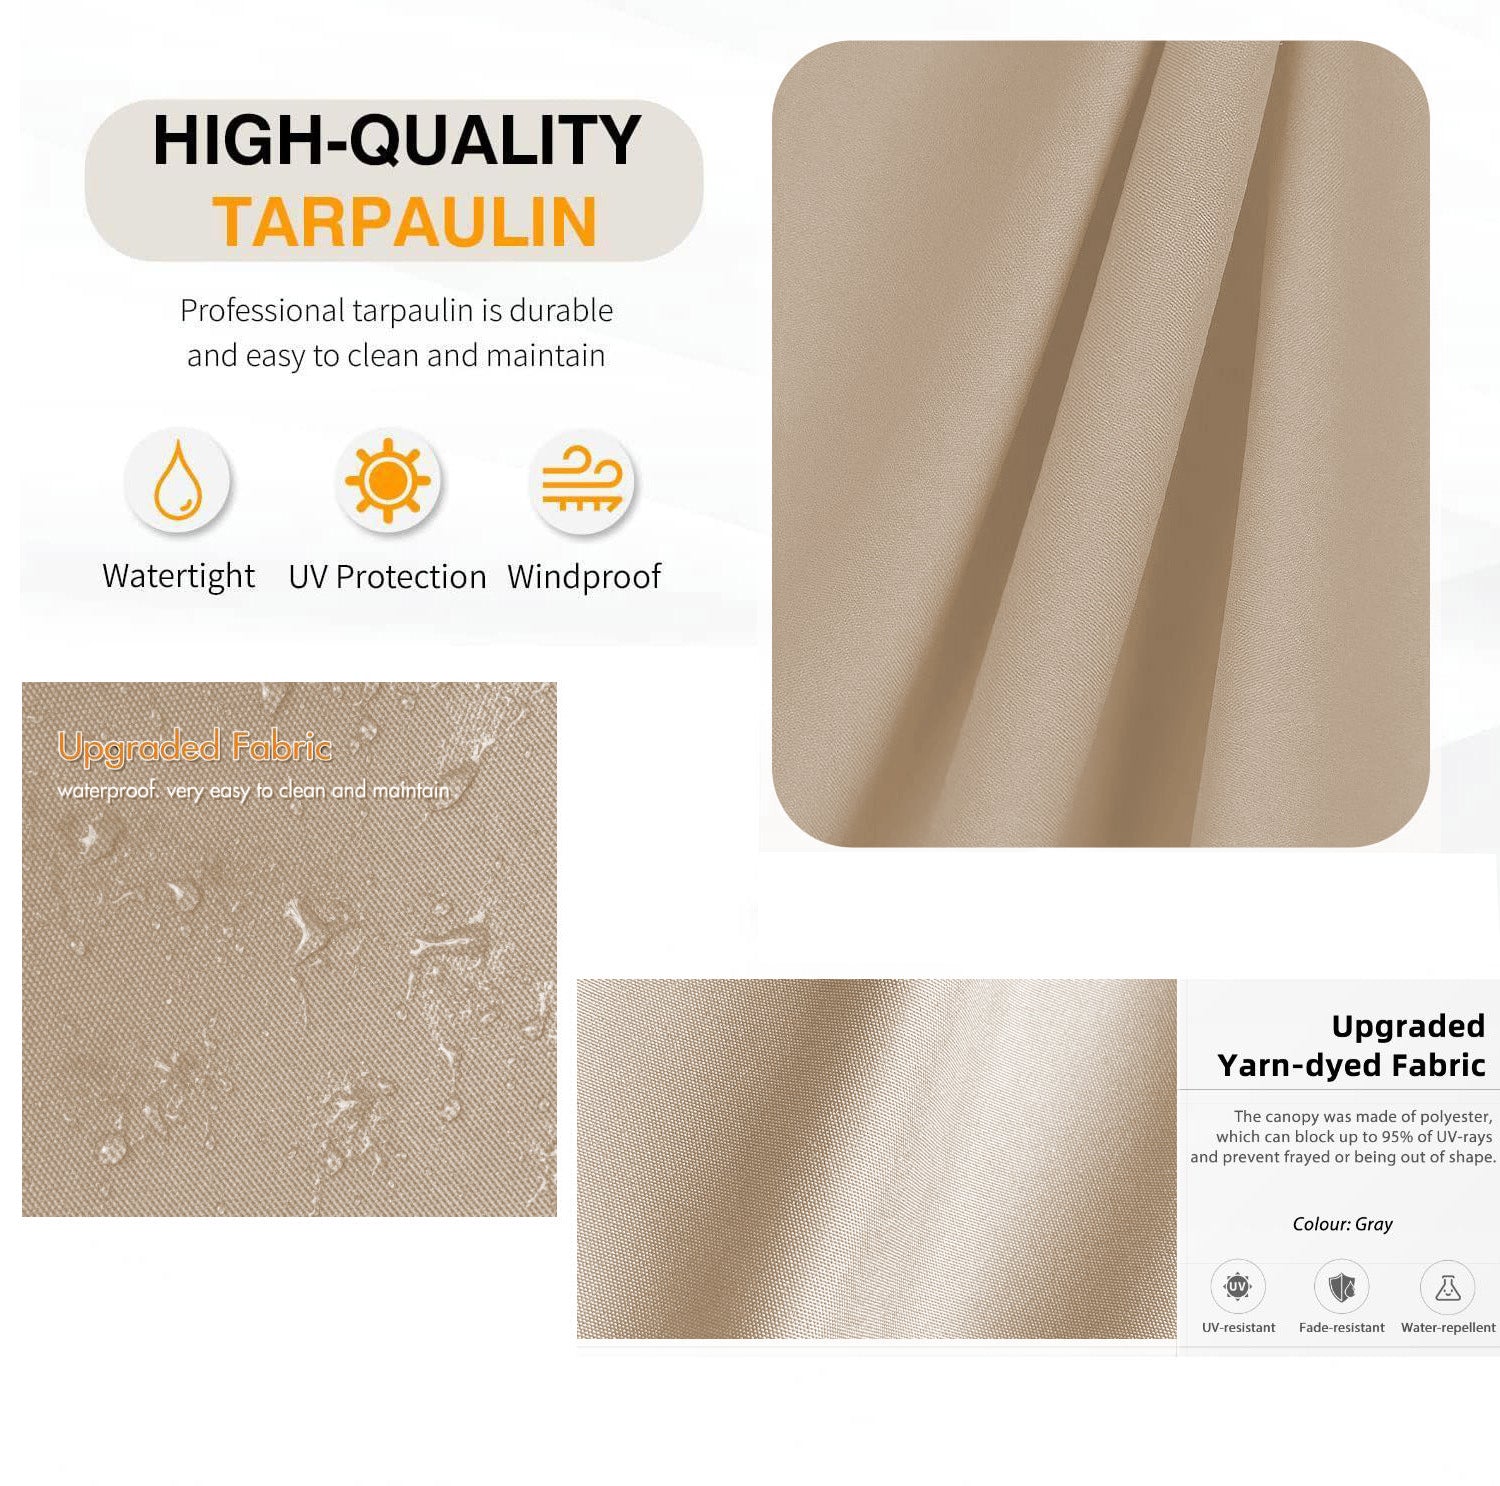 Replacement Canopy Top Cover Fabric for 13 x 10 Ft khaki-polyester